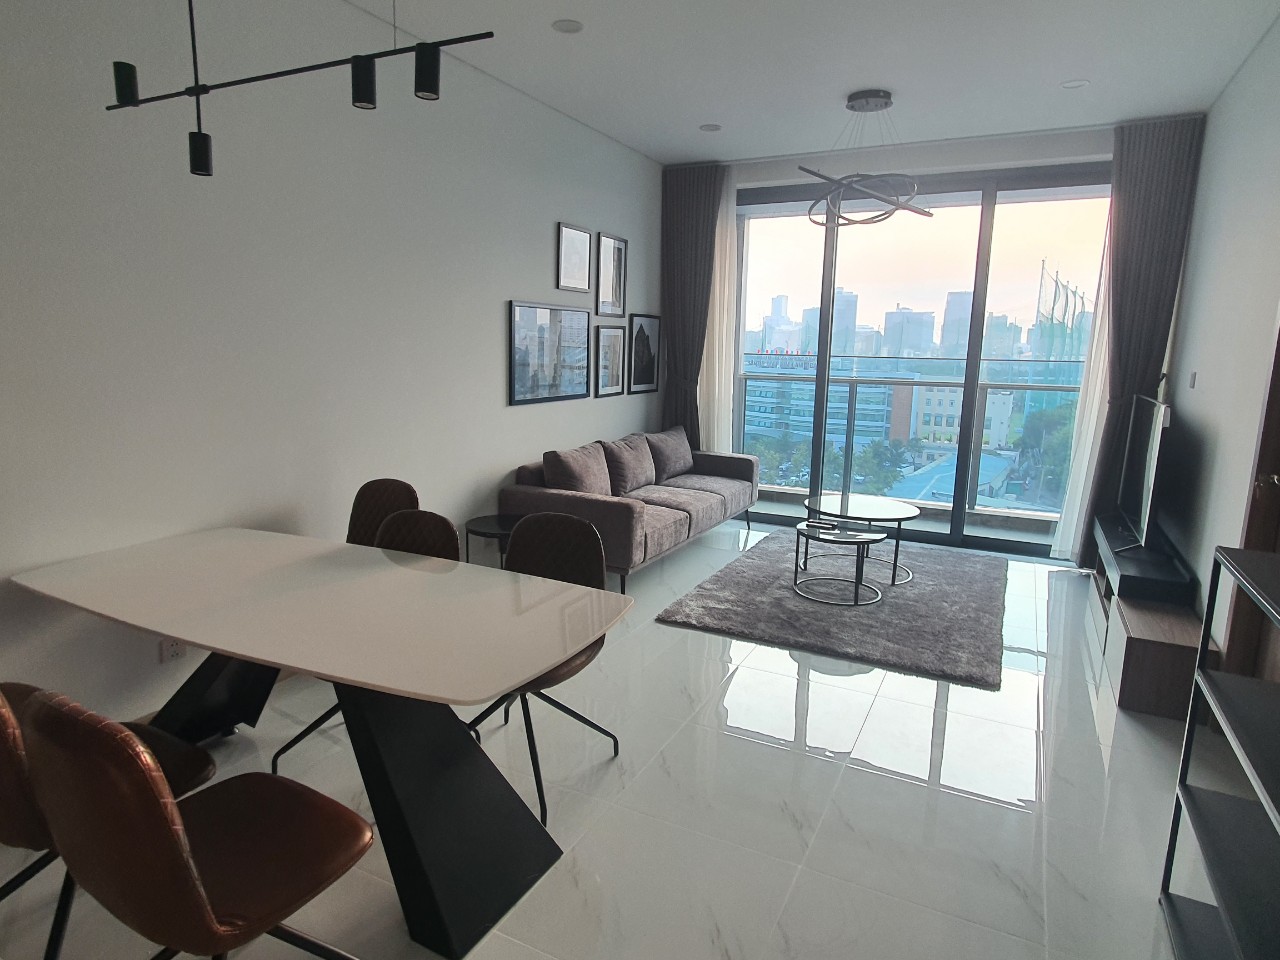 2 bedroom apartment for rent in Sunwah Pearl with panoramic city view